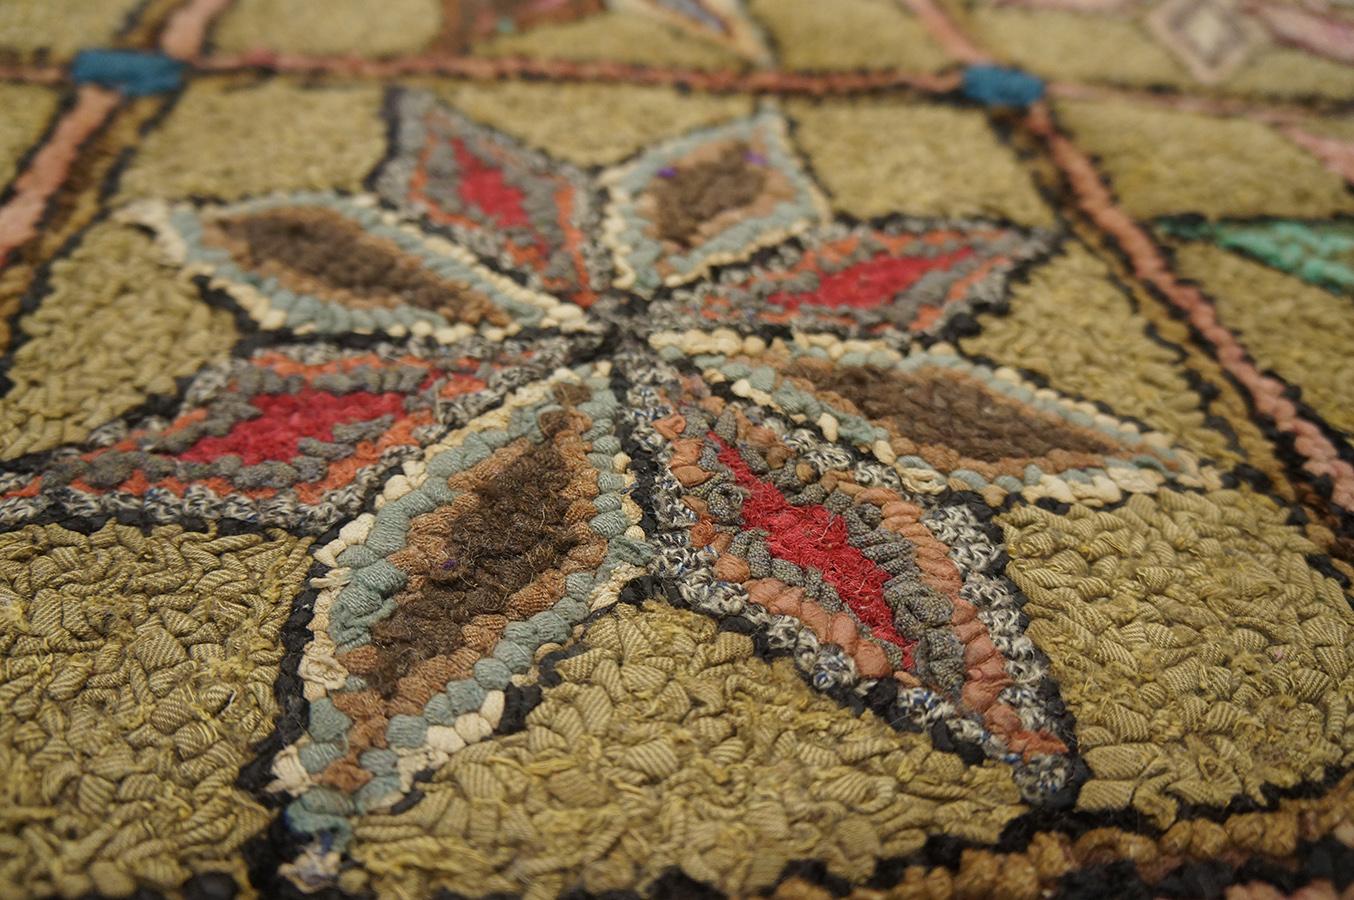 Early 20th Century American Hooked Rug ( 10' x 12'2